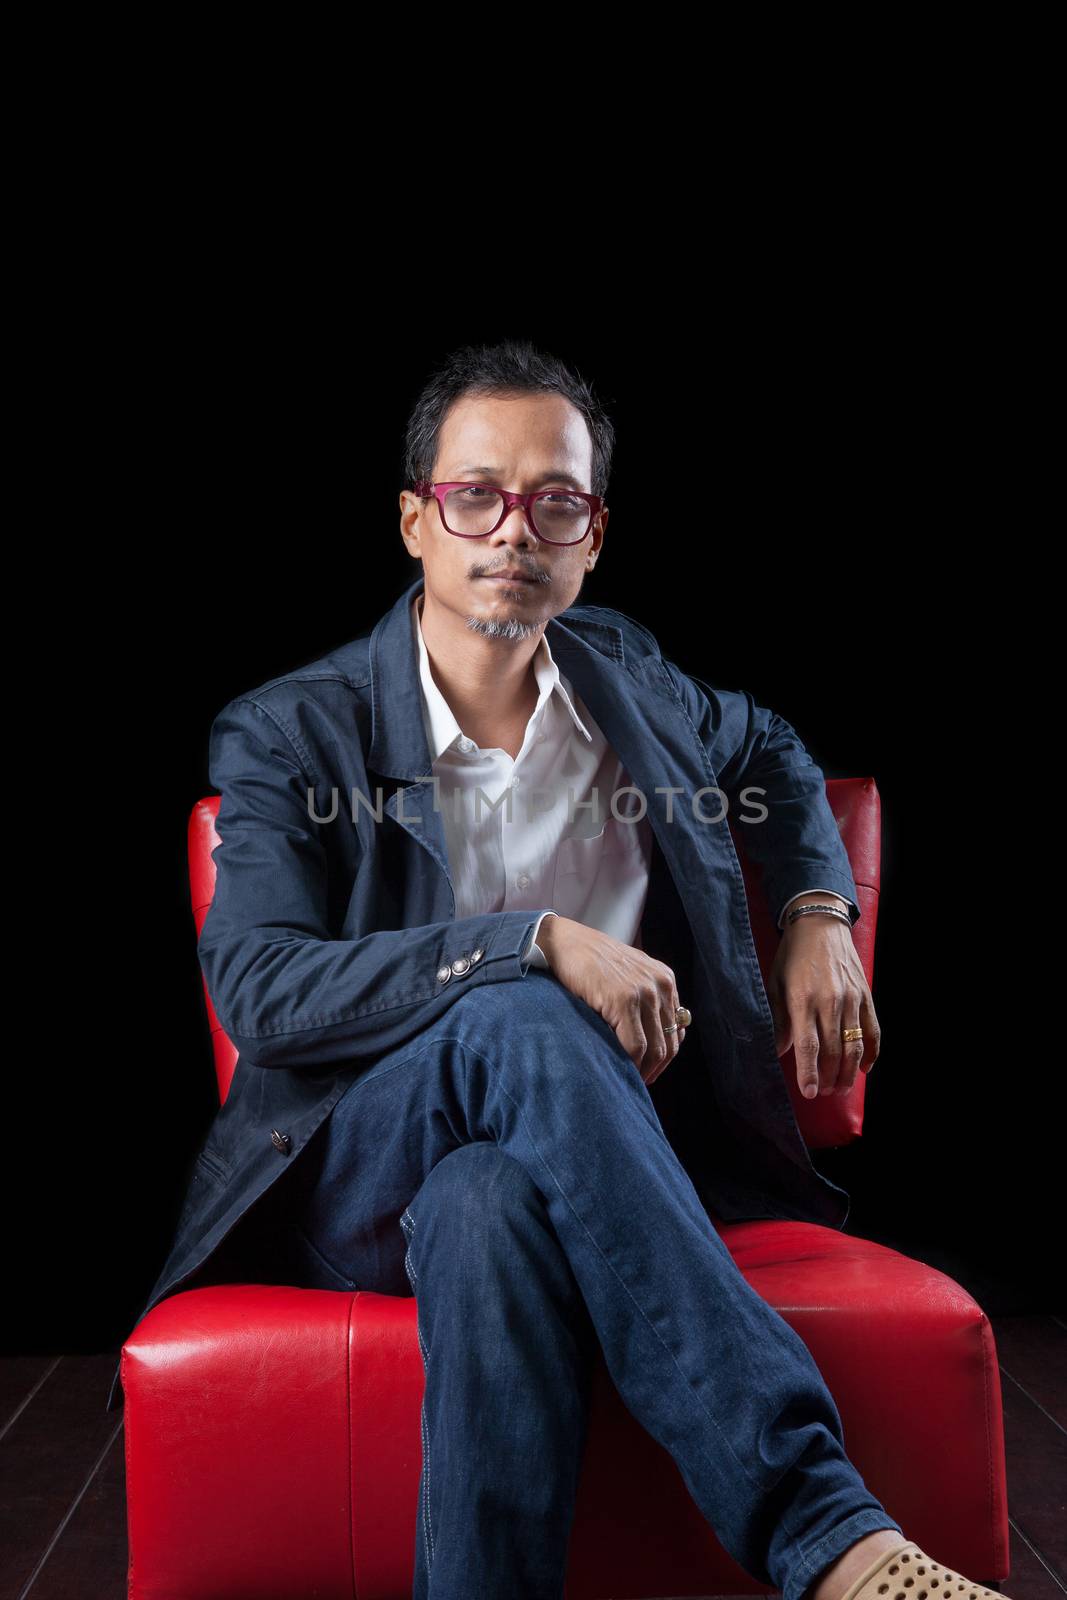 portrait face of 45s years old asian man sitting on red sofa in dark room with studio lighting photography